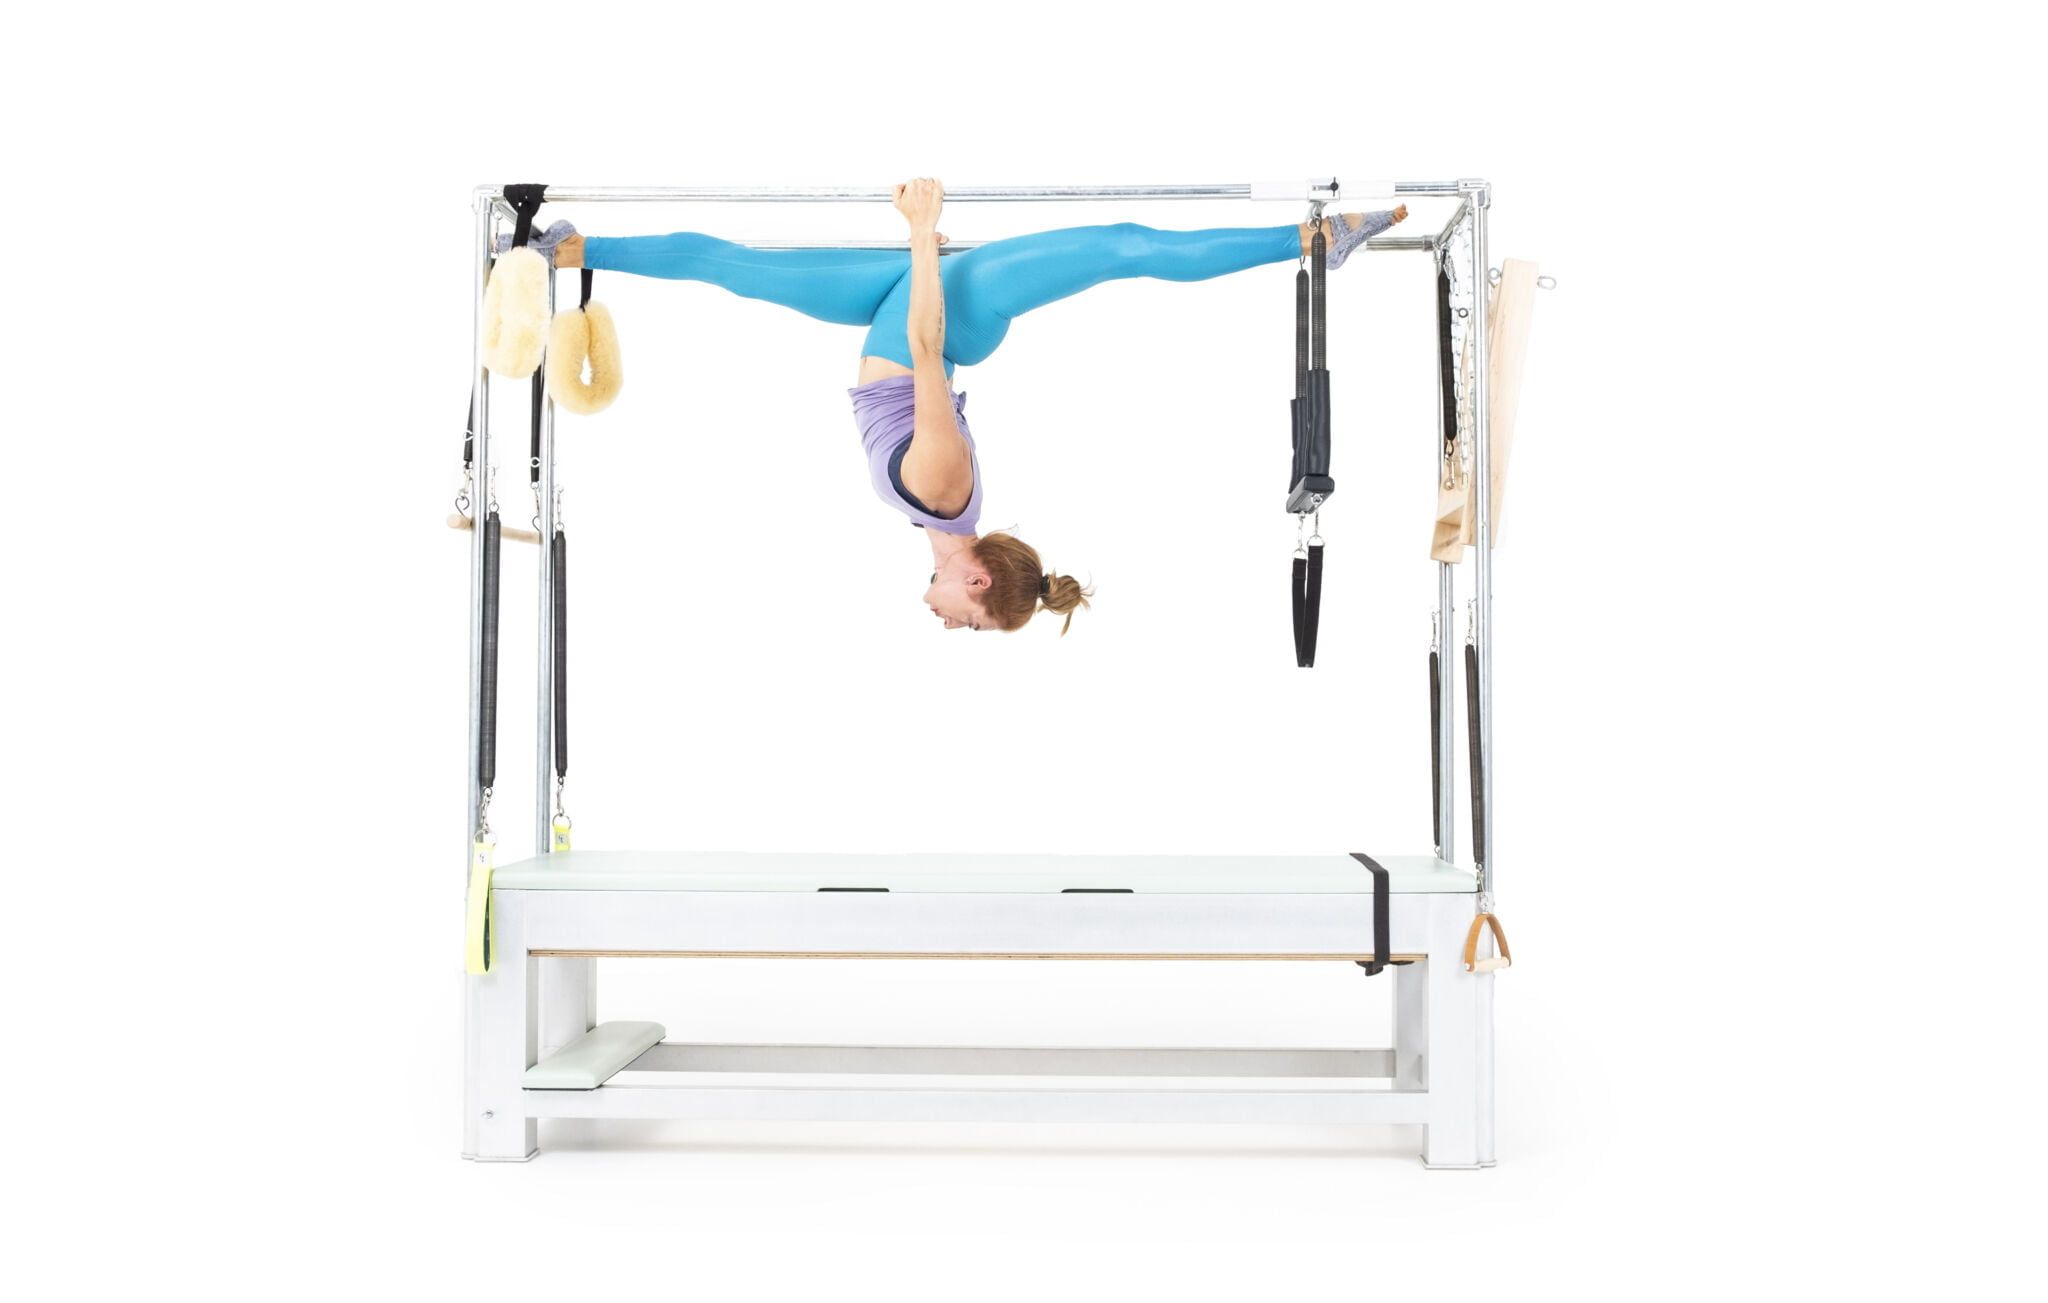 Splits on the Cadillac Online Pilates Classes